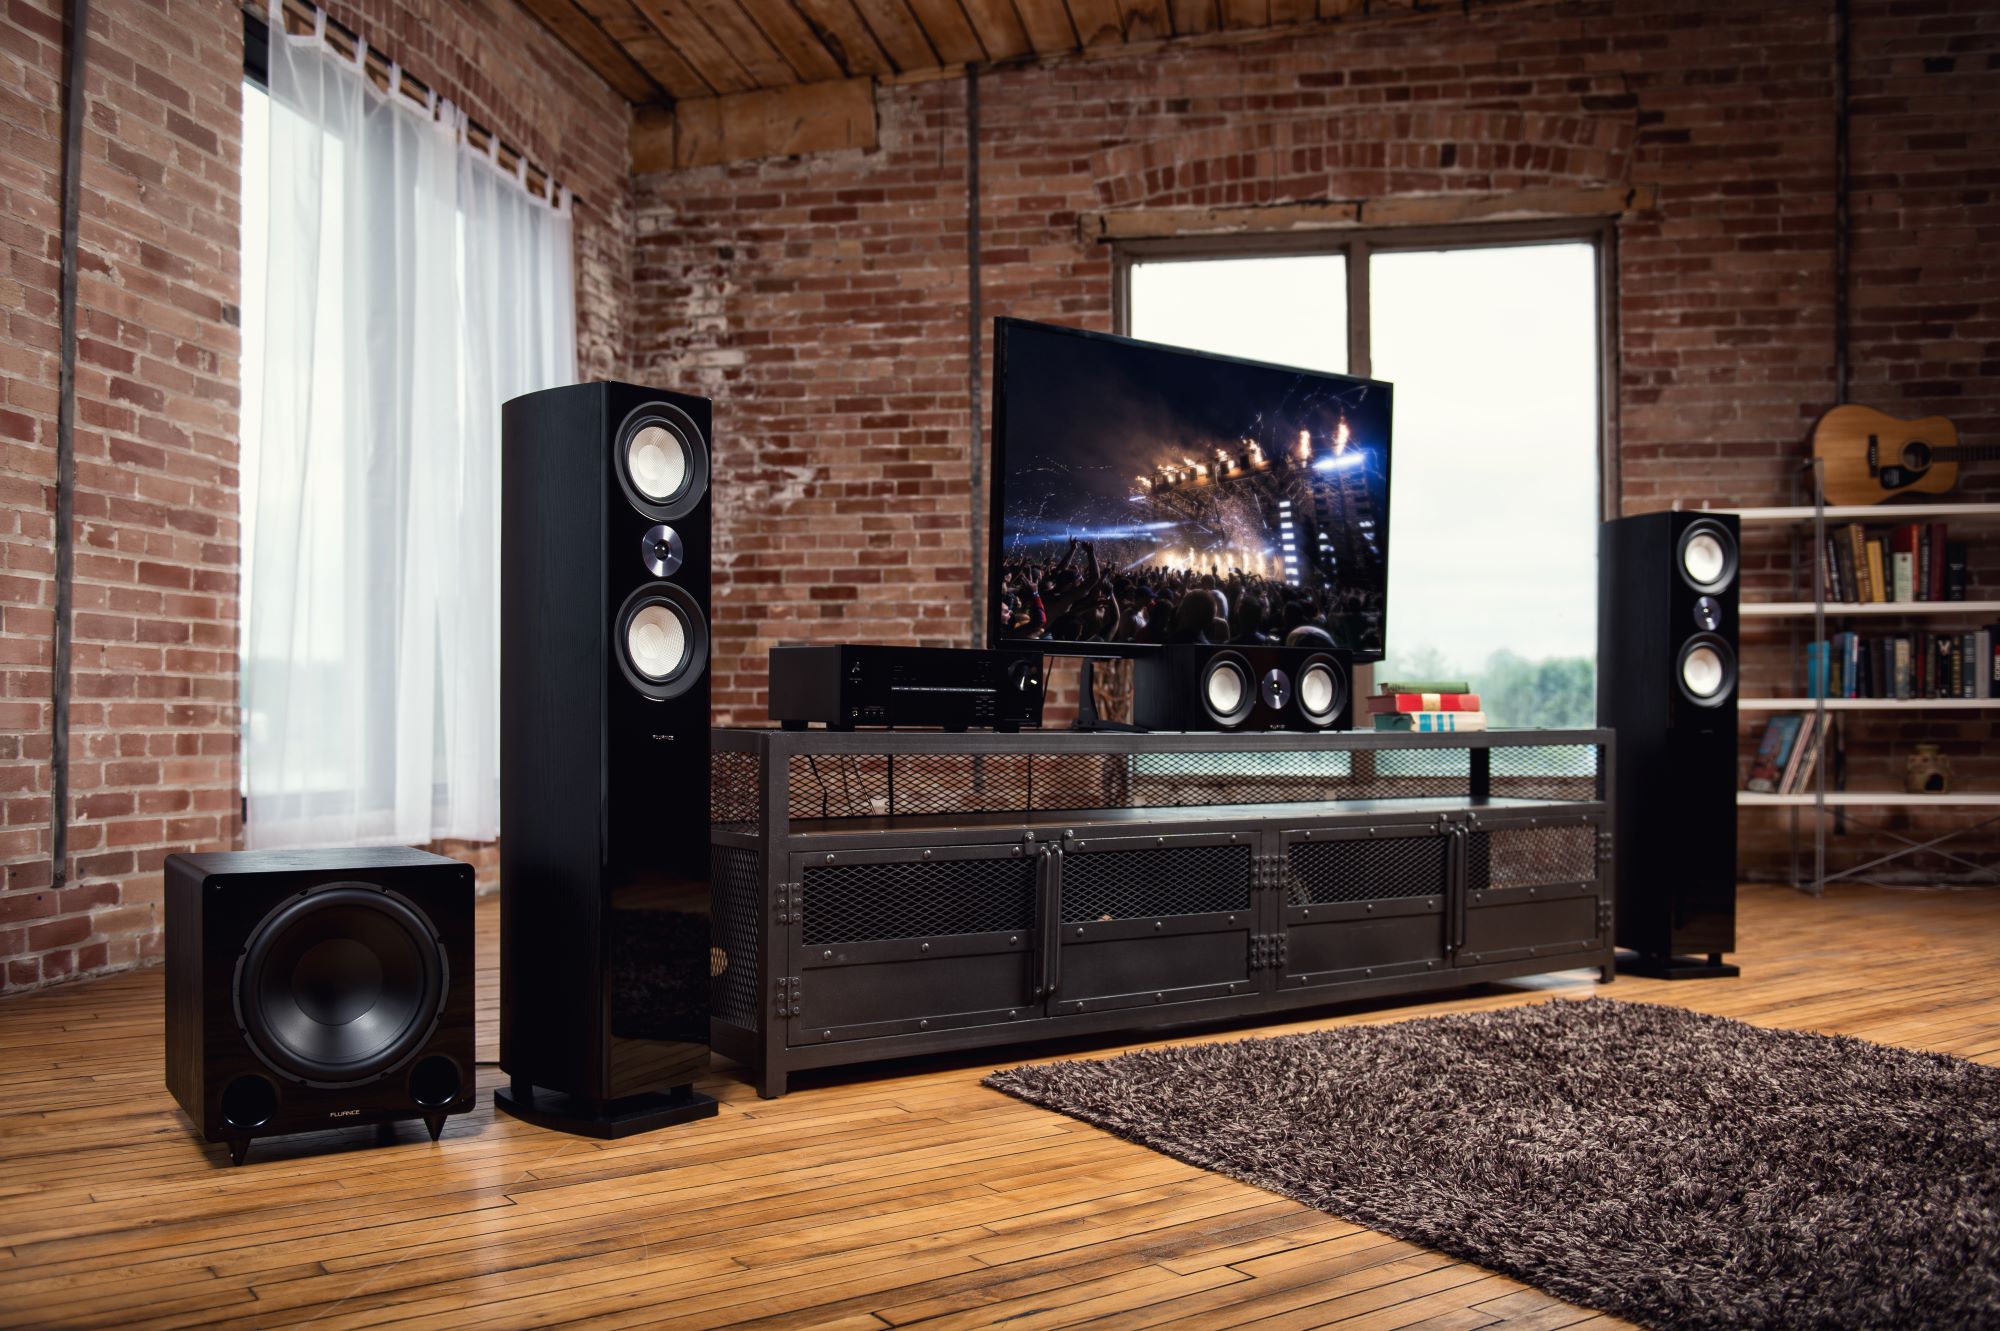 Staying Home: Benefits of a Home Theater Room